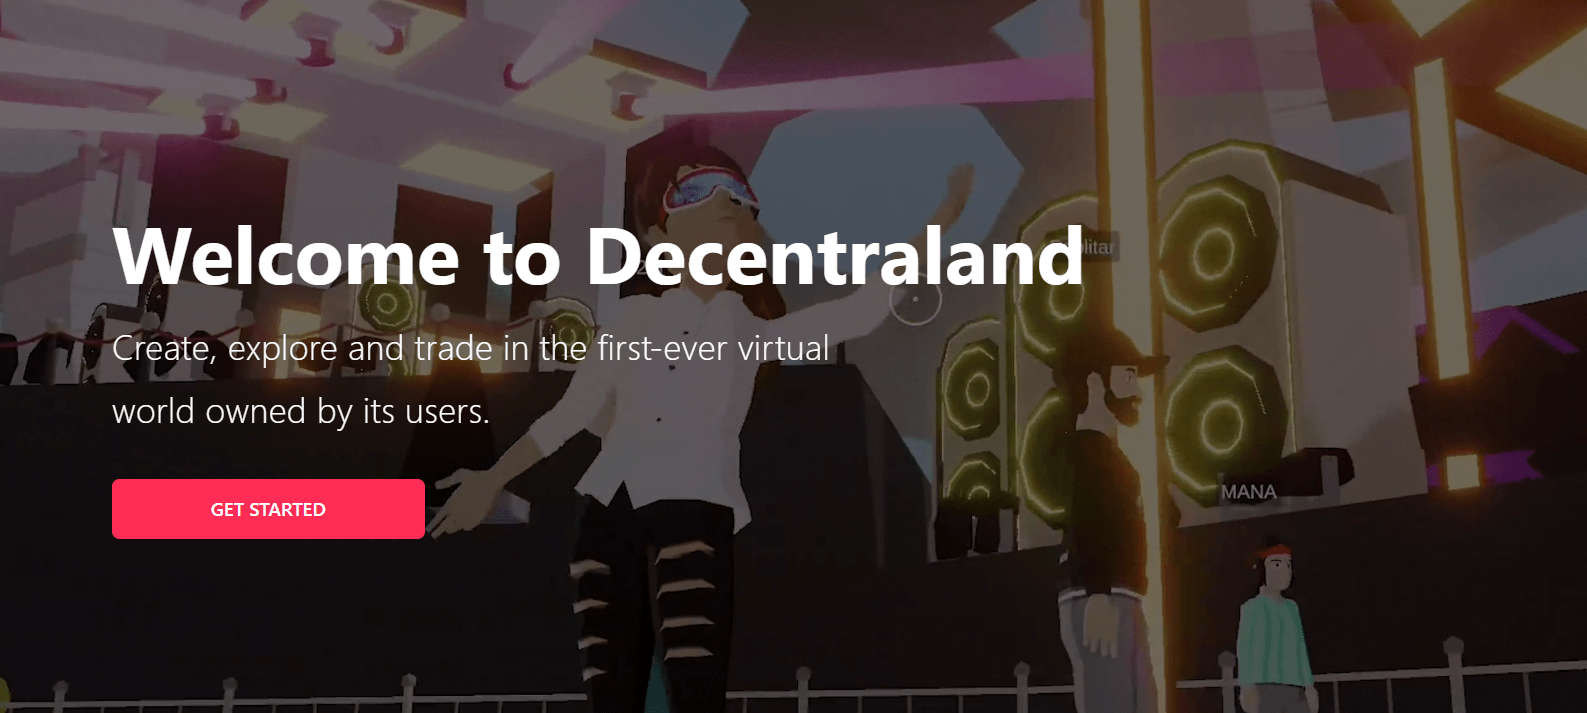 What is decentraland